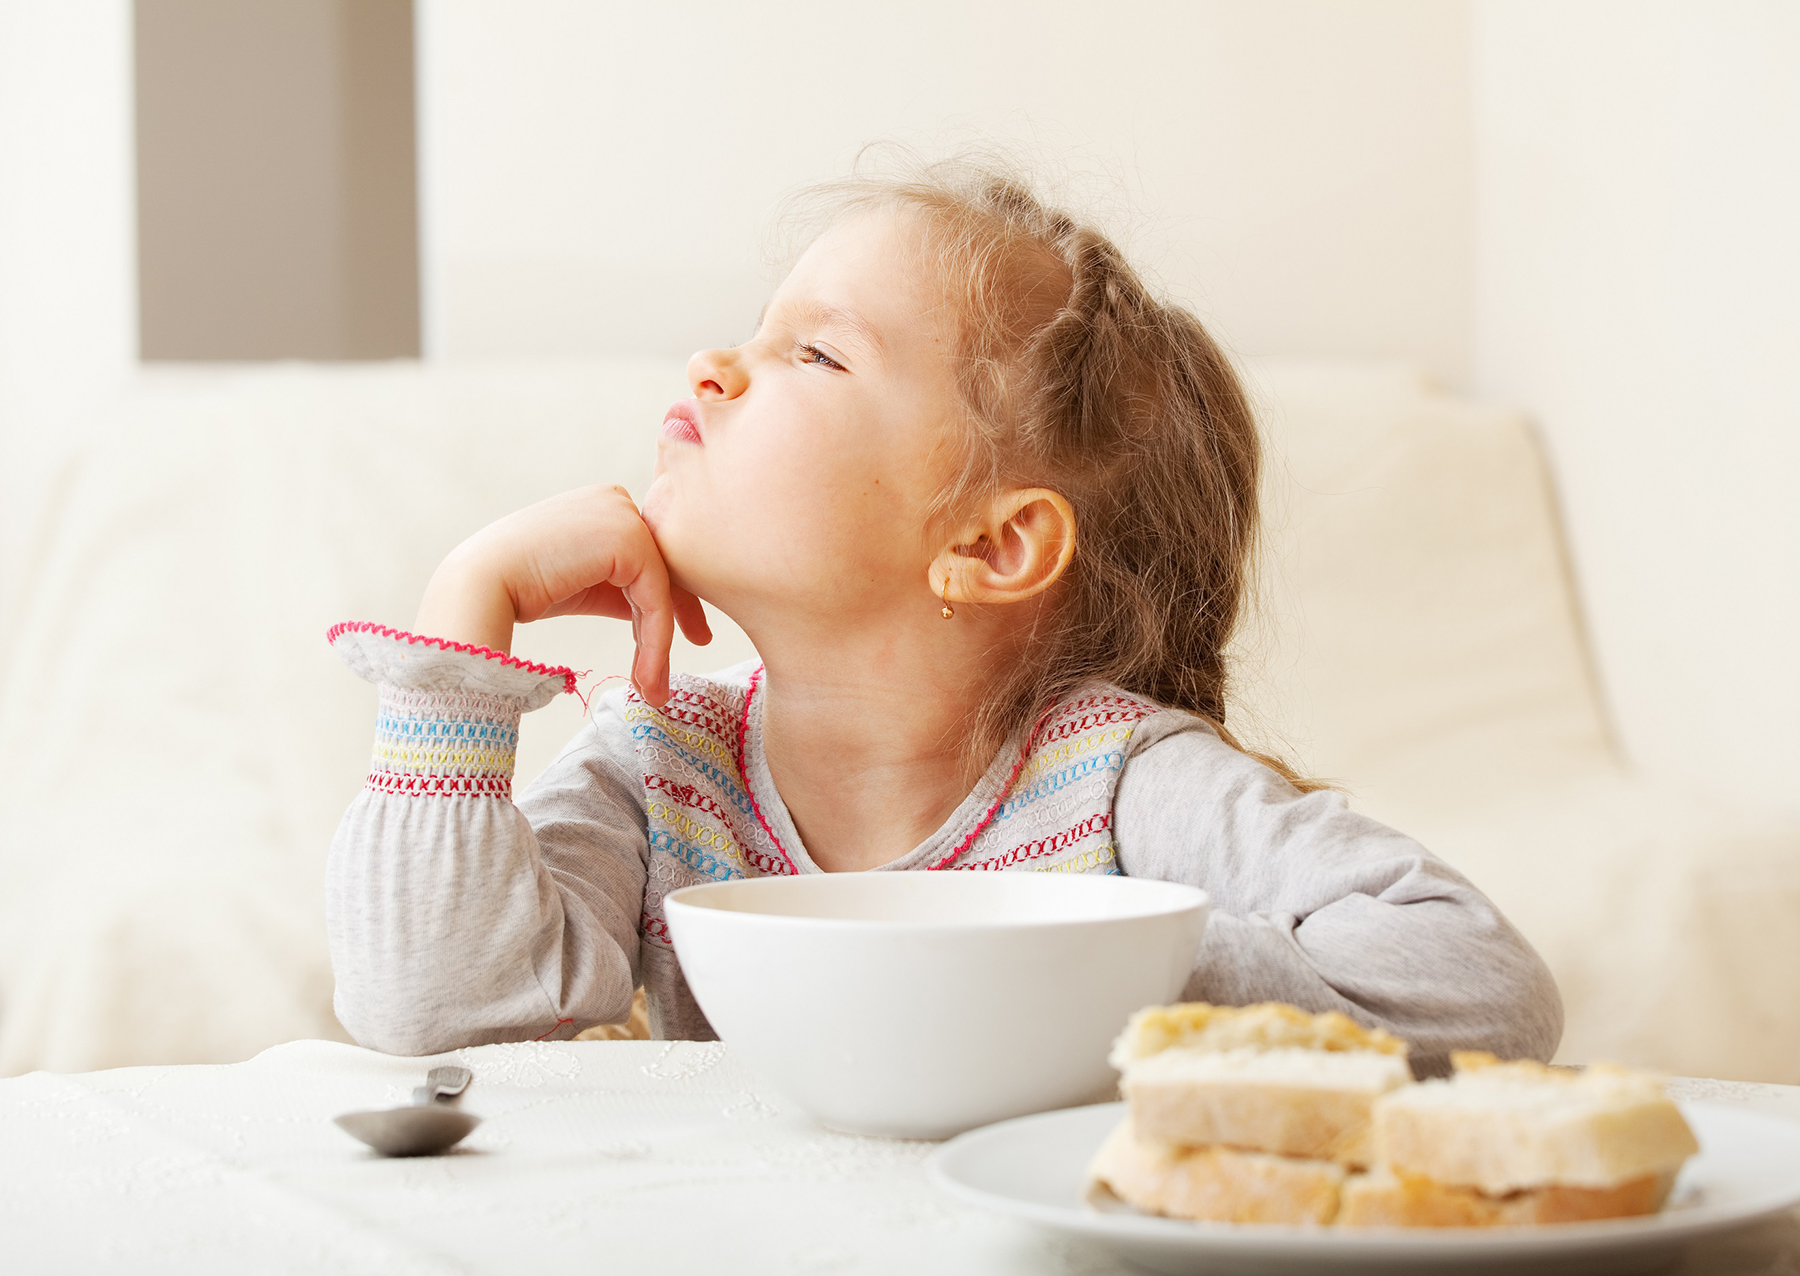 How We're Accidentally Teaching Our Kids Bad Eating Habits